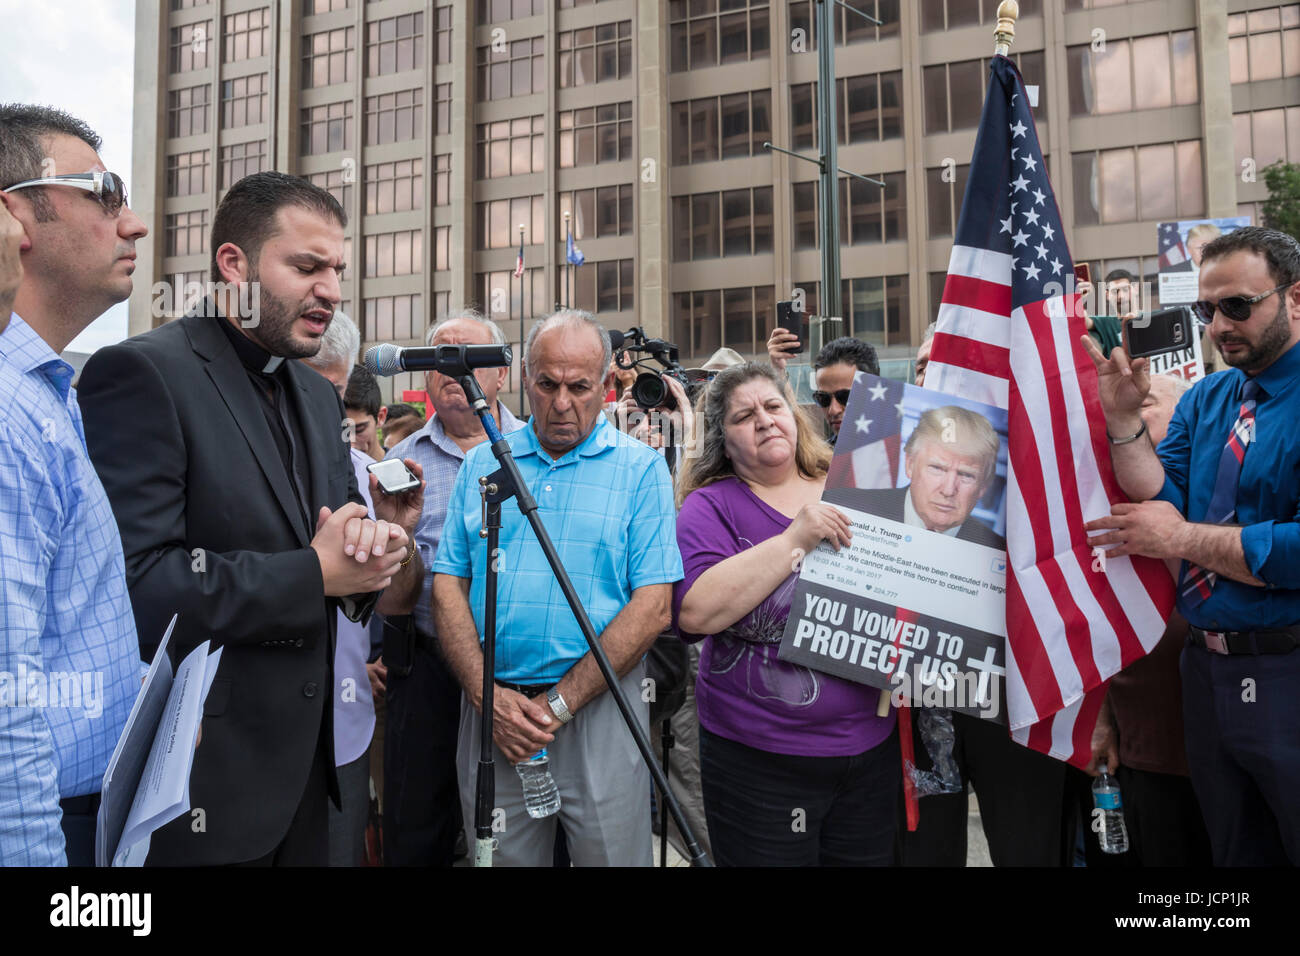 Detroit, Michigan, USA. 16th June, 2017. Members of Detroit's Chaldean community of Iraqi Christians protest the government's arrest of dozens of Iraqis who they plan to deport. Family members say that Iraqi Christians face genocide if they are returned to Iraq. Fr. Anthony Kathawa of St. Thomas Chaldean Catholic Church in West Bloomfield, Michigan, leads a prayer at the end of the rally. Credit: Jim West/Alamy Live News Stock Photo